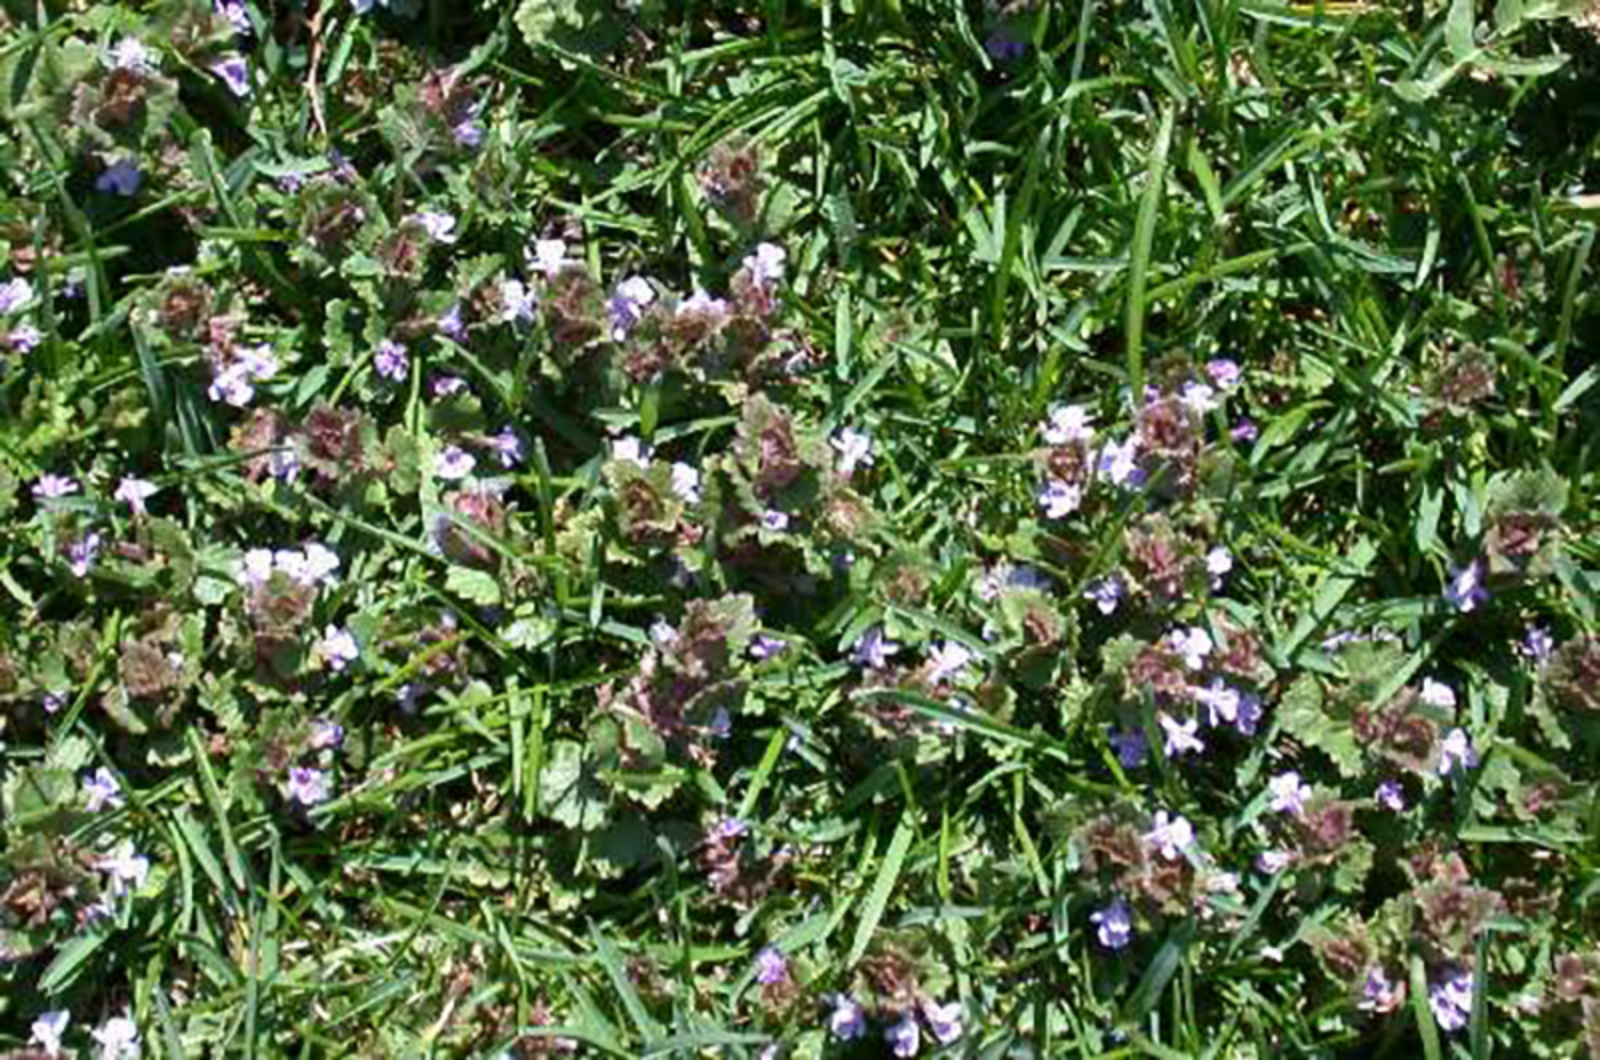 Ground Ivy flowering during early May.